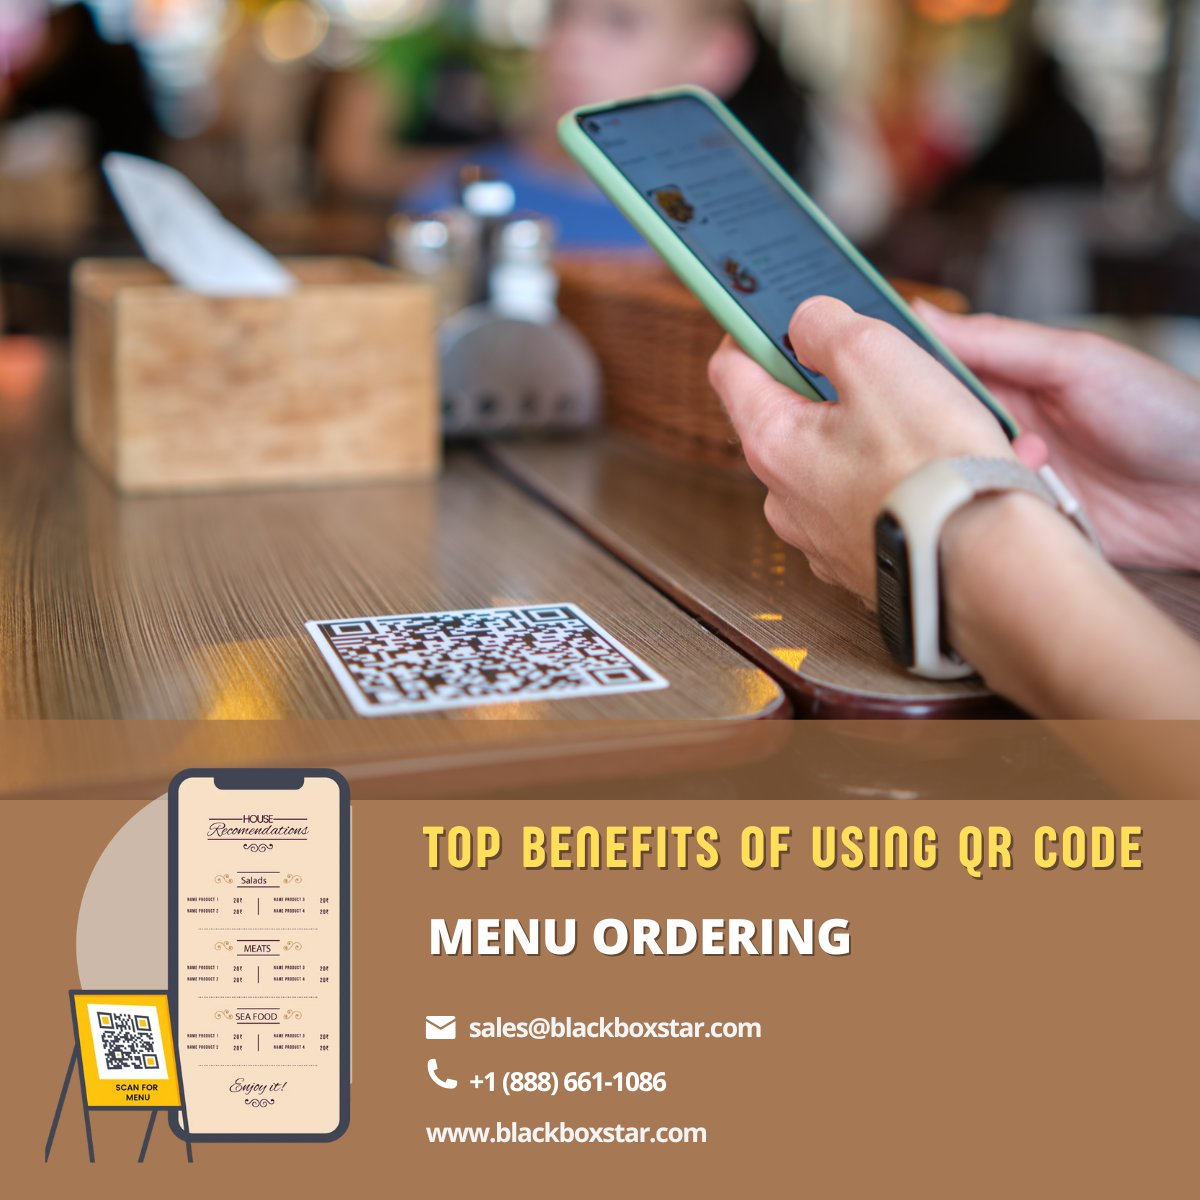 🚀 QR code menu ordering is revolutionizing dining! 🍽️ Enjoy convenience, contactless ordering, real-time menu updates, increased efficiency, and better accessibility. Have you tried it yet? Share your thoughts! #RestaurantTech #QRCodeOrdering #Innovation #CustomerExperience